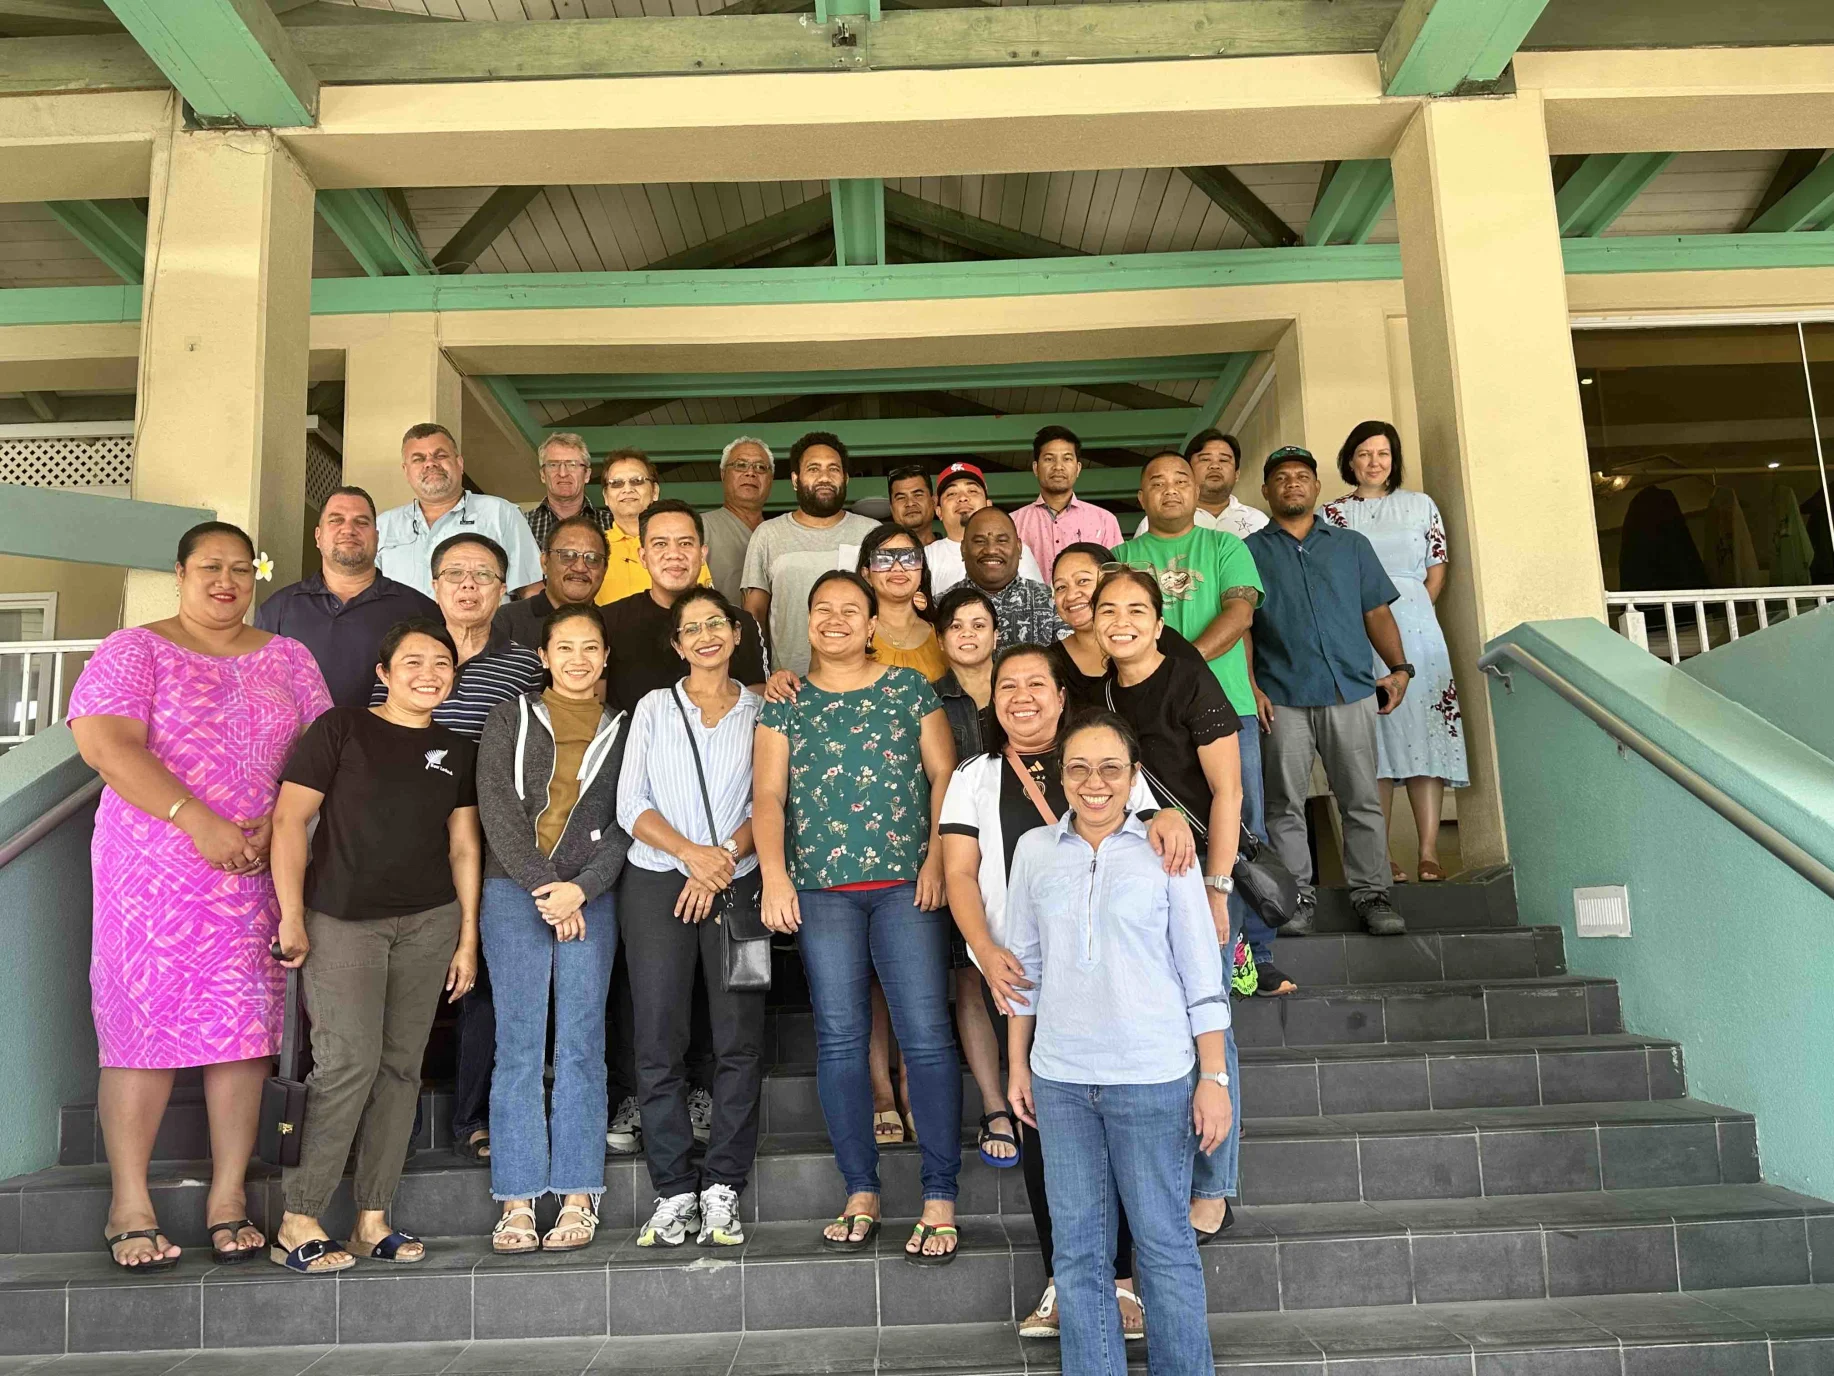 The Pacific Community’s (SPC) Public Health Division (PHD) and Statistics of Development Division (SDD), in collab with ABS, PIHOA, BAG partners have been conducting workshops and training in MCDD and CRVS.